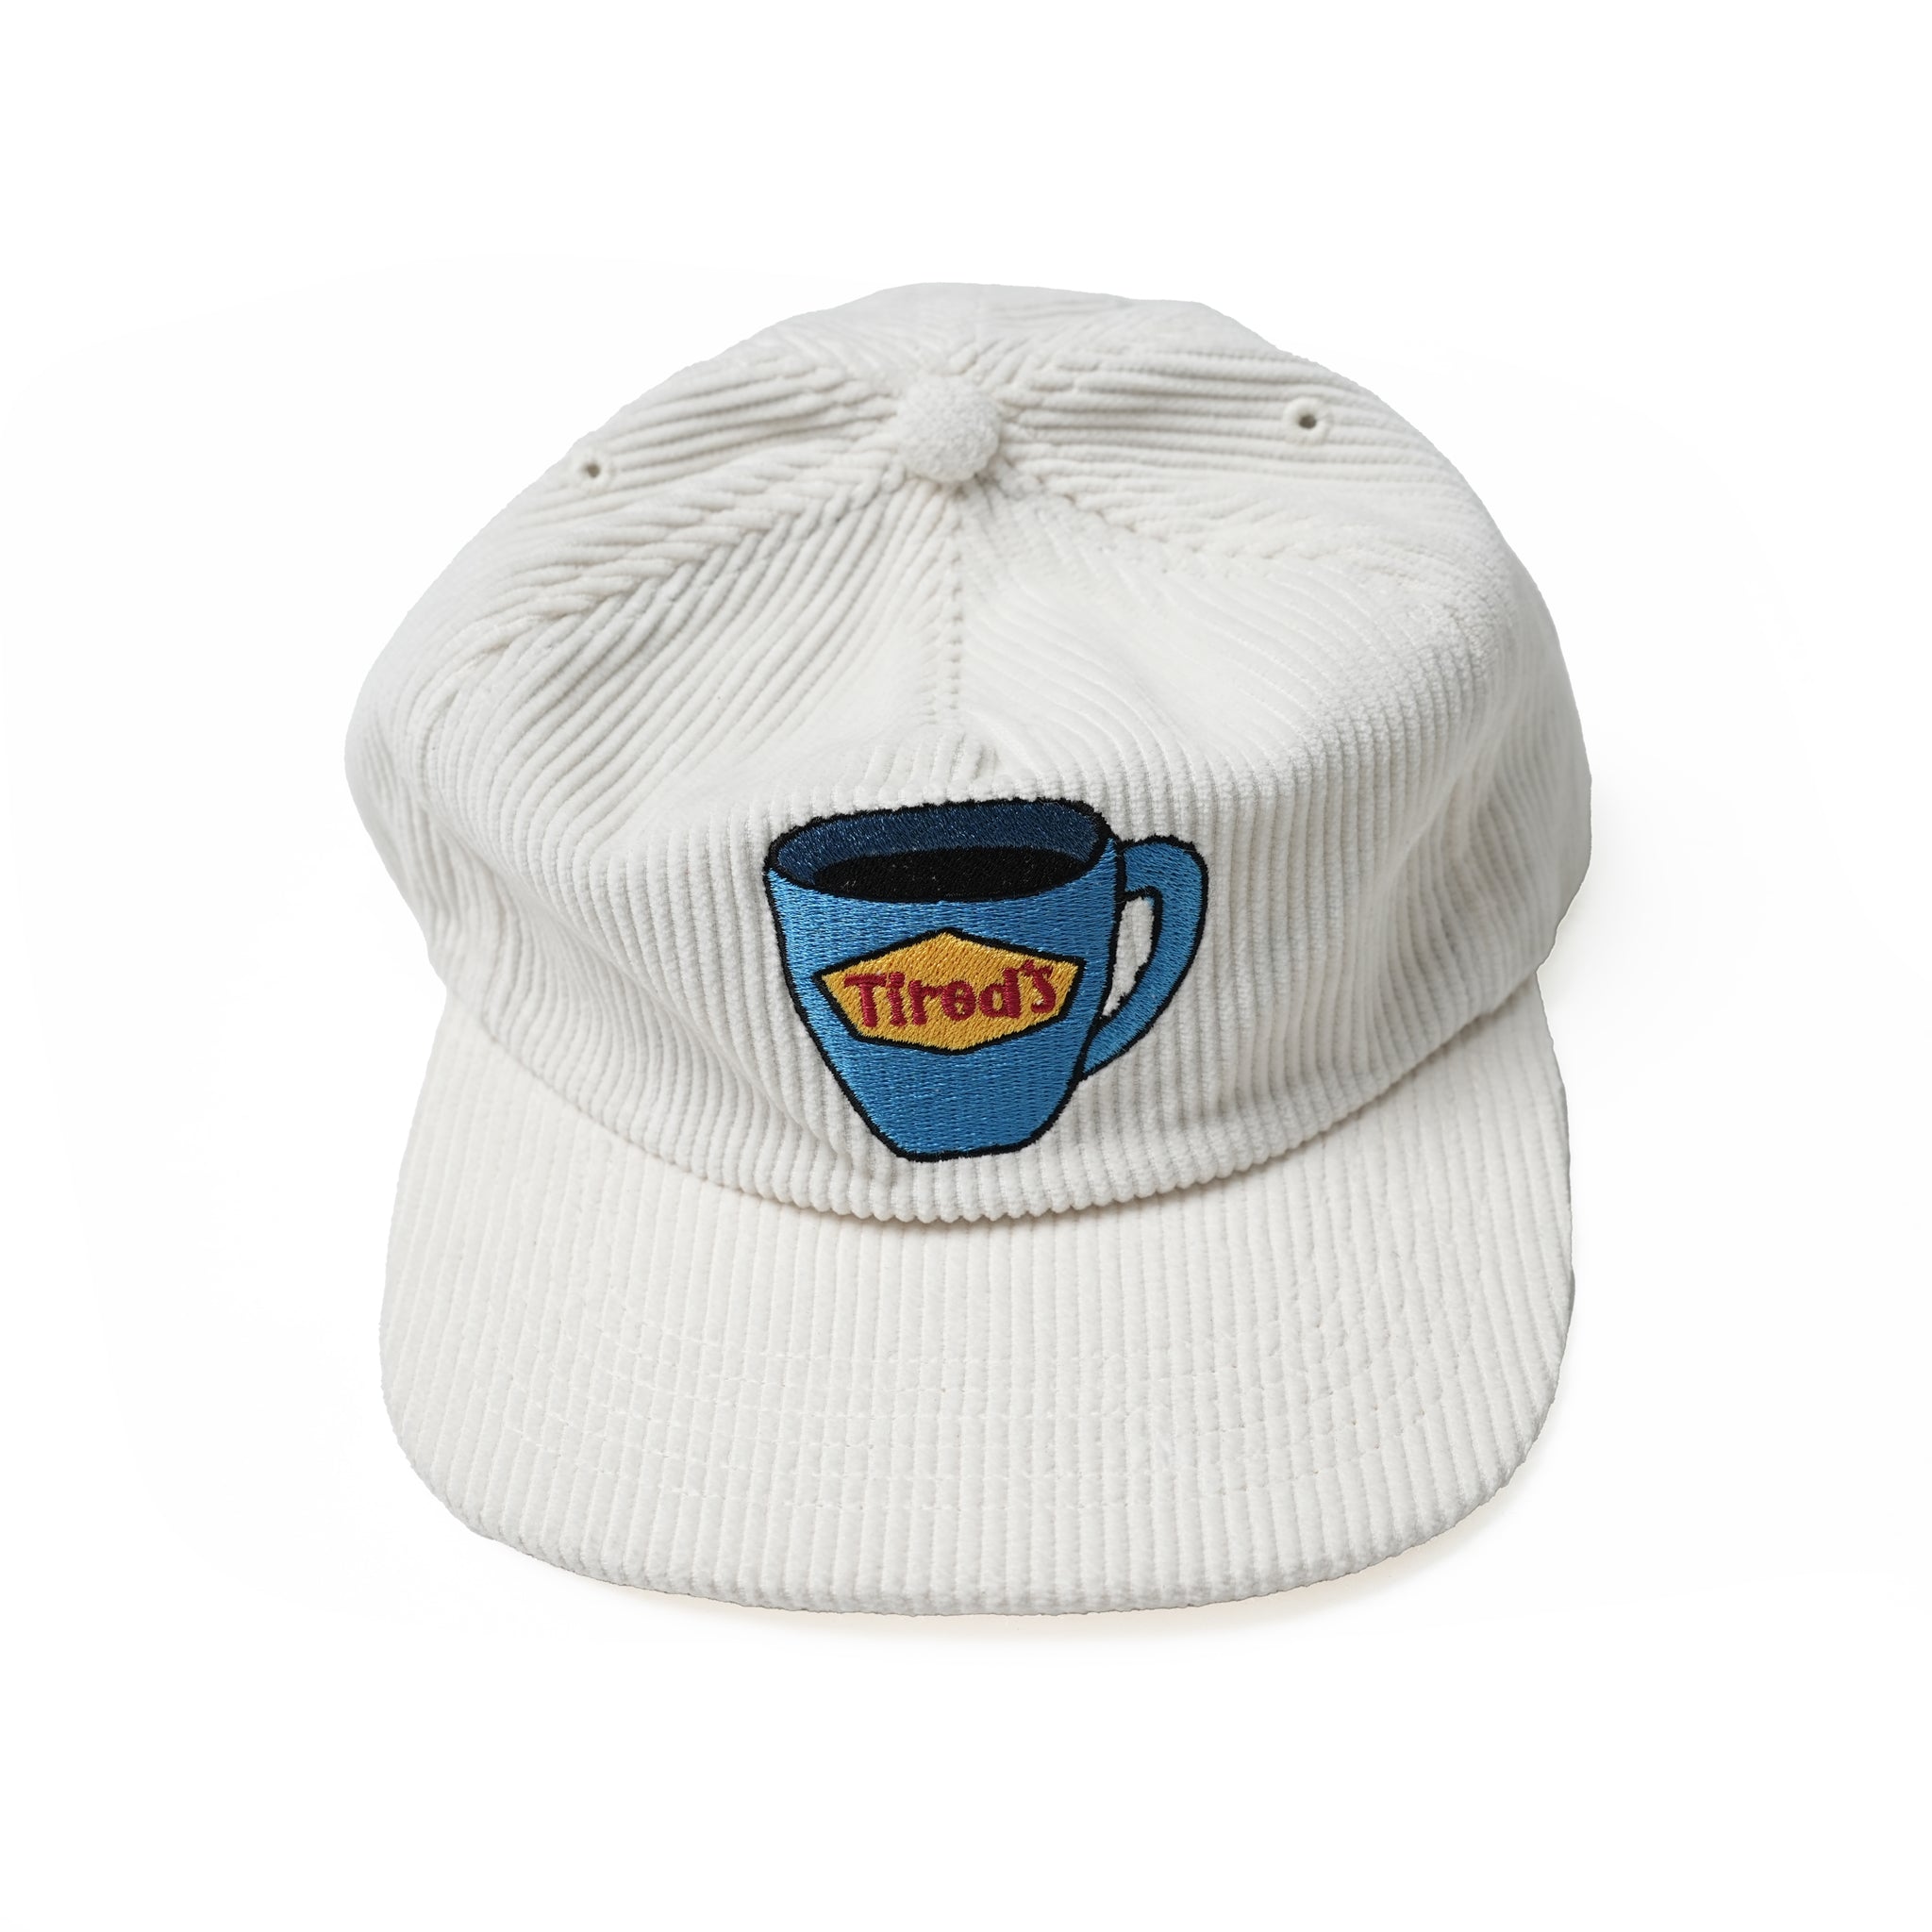 No:TS00362 | Name:TIRED'S WASHED CORD CAP | Color:White【TIRED_タイレッド】